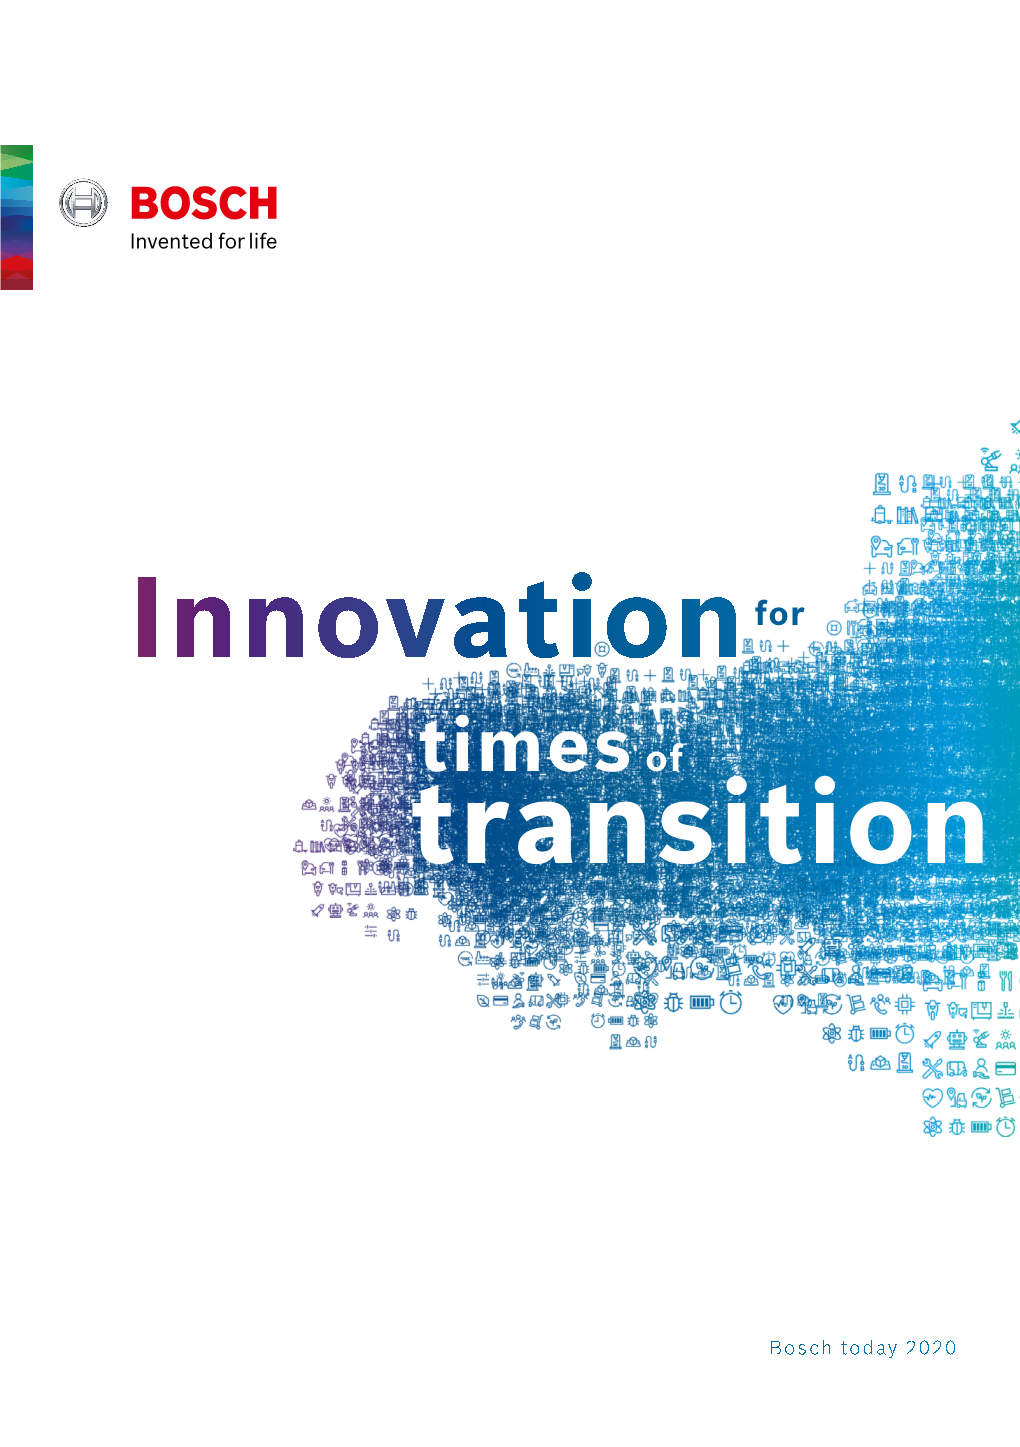 Bosch Today 2020 | Innovation for Times of Transition